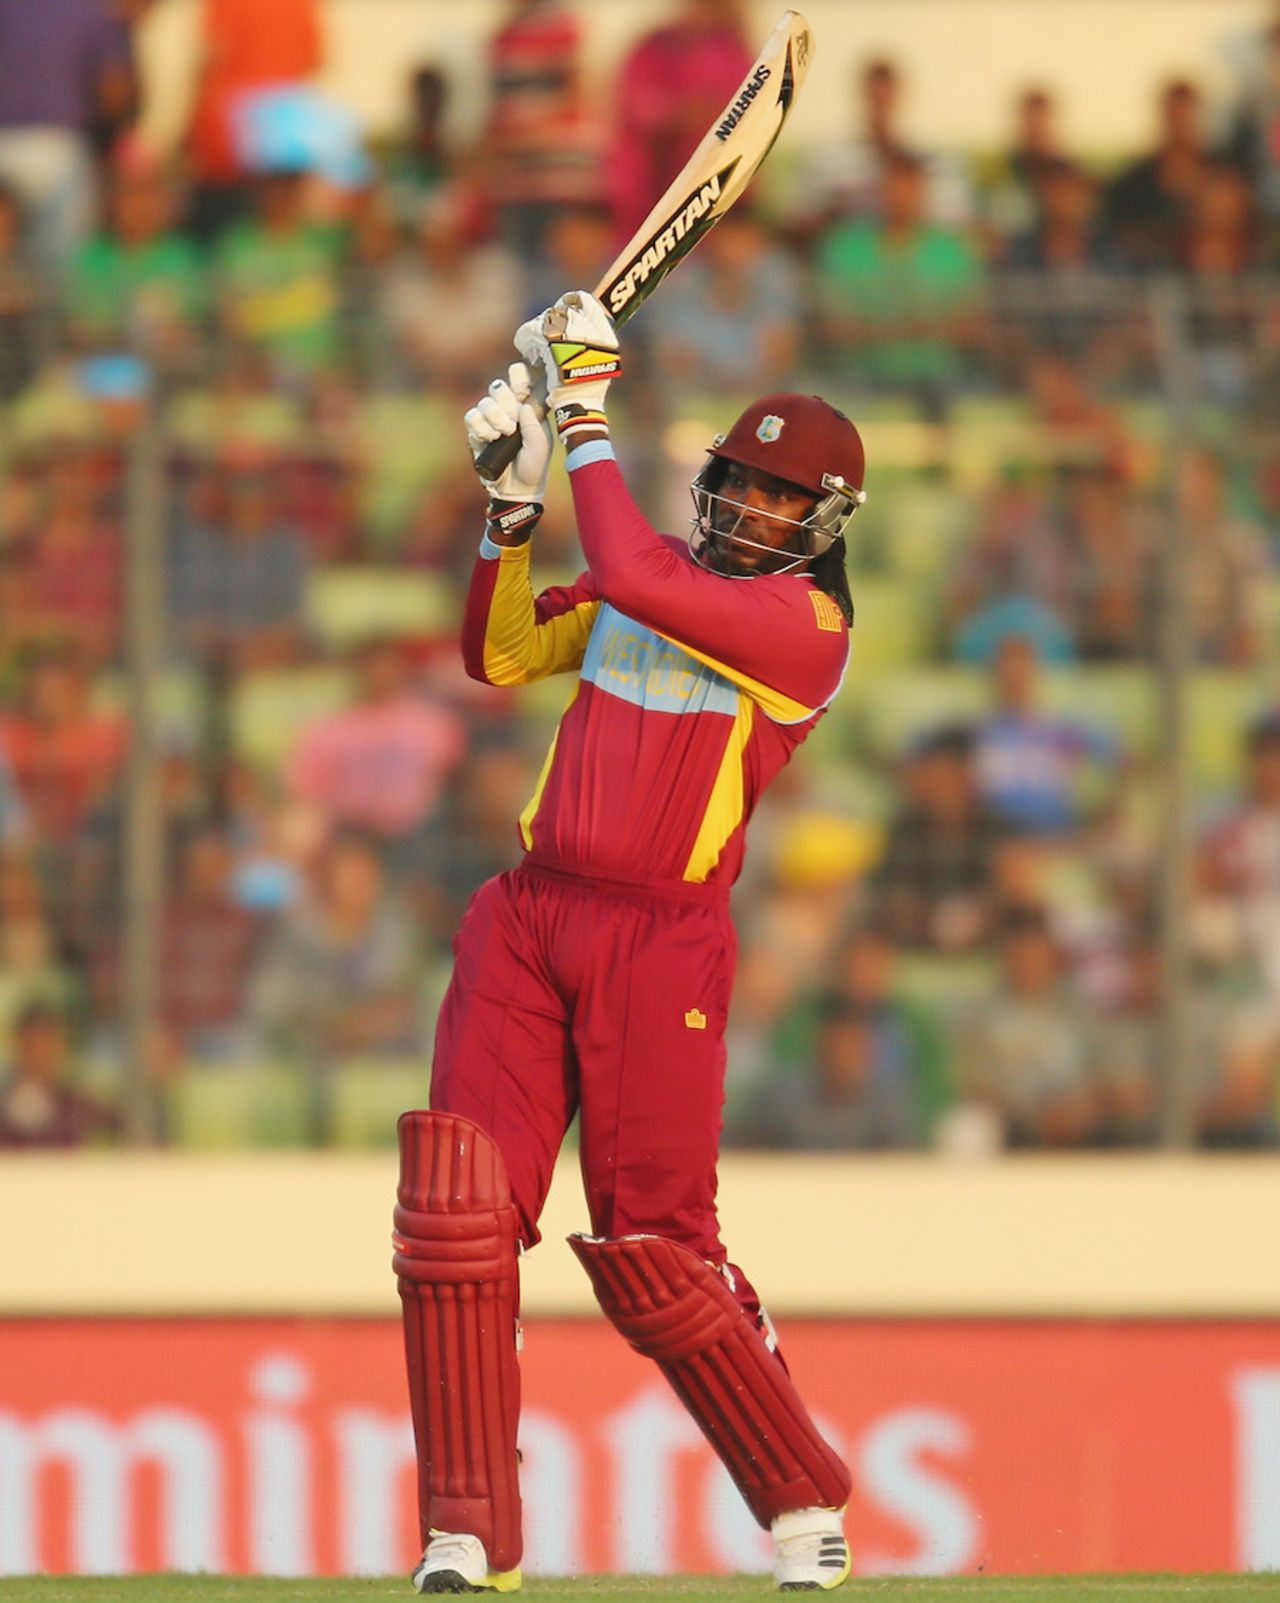 Chris Gayle goes on the offensive, Australia v West Indies, World T20, Group 2, Mirpur, March 28, 2014